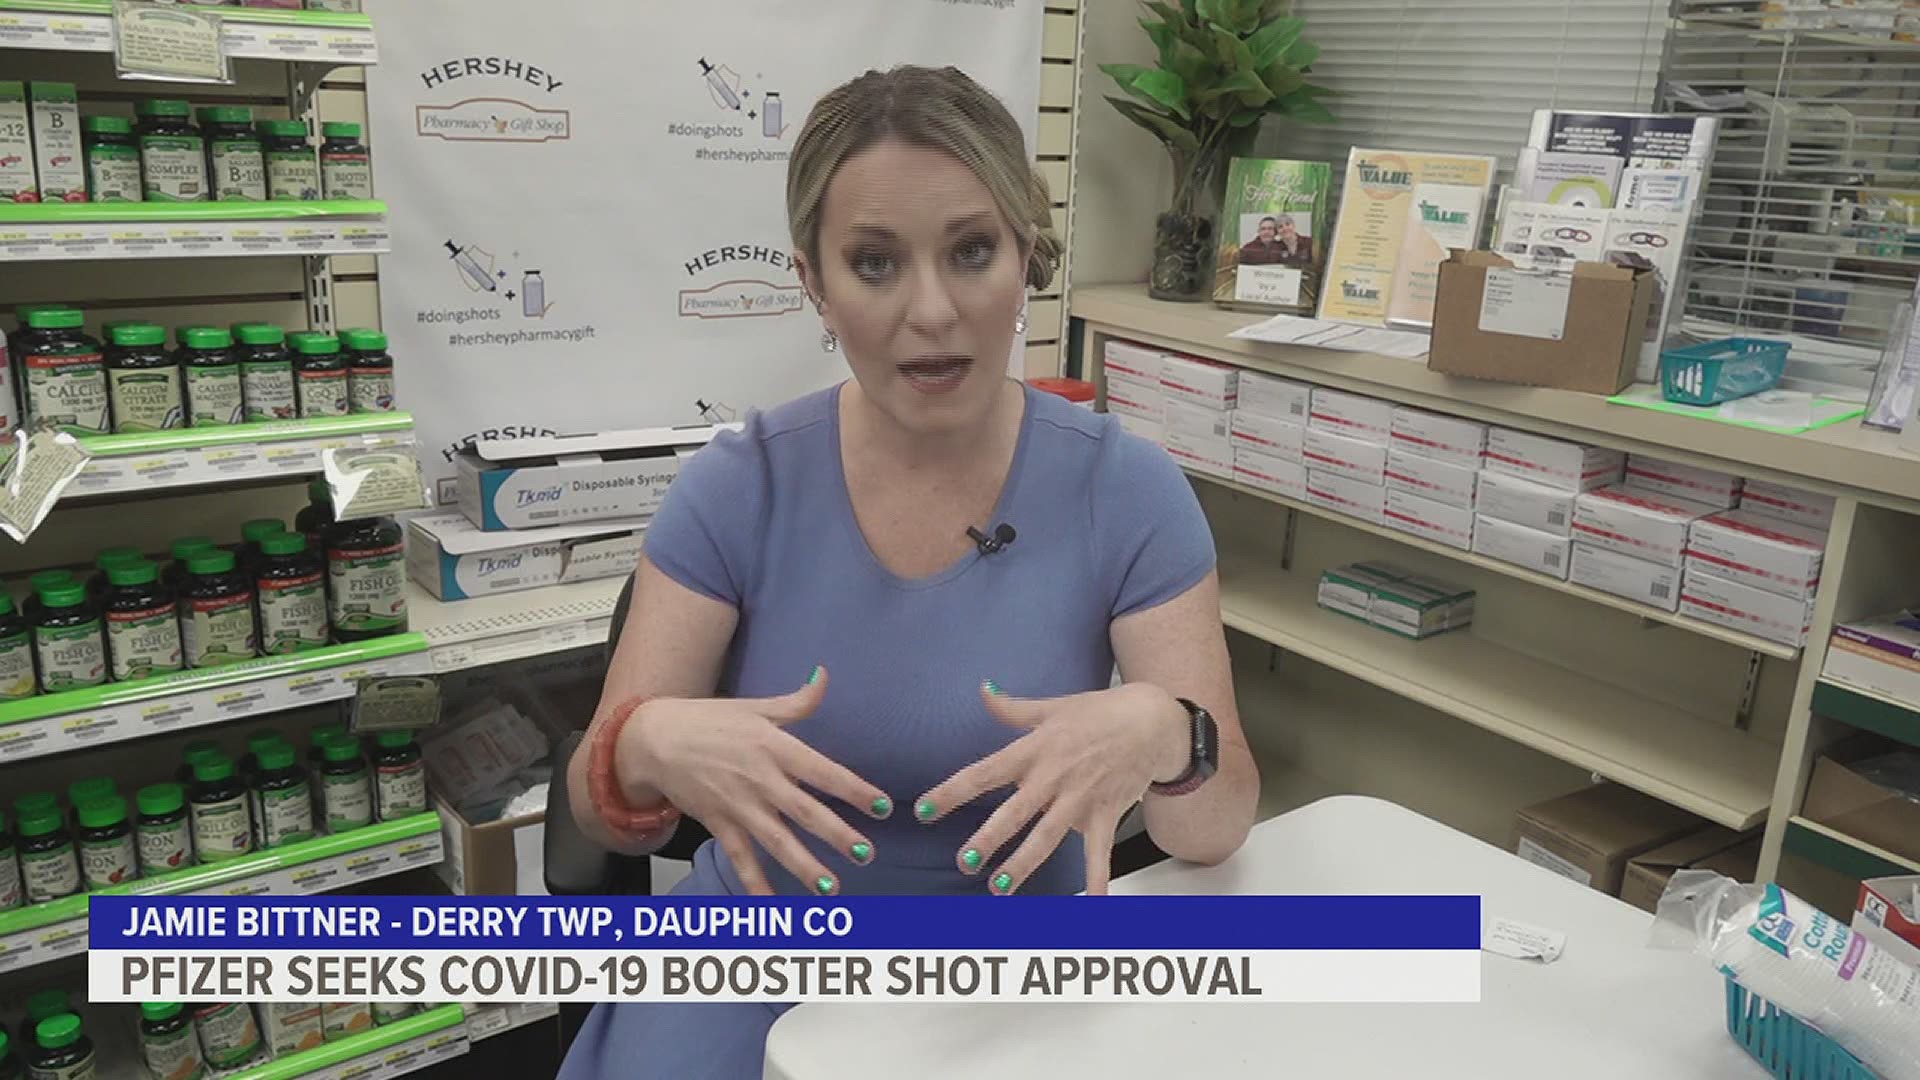 Pfizer is seeking authorization for a Covid-19 booster shot.